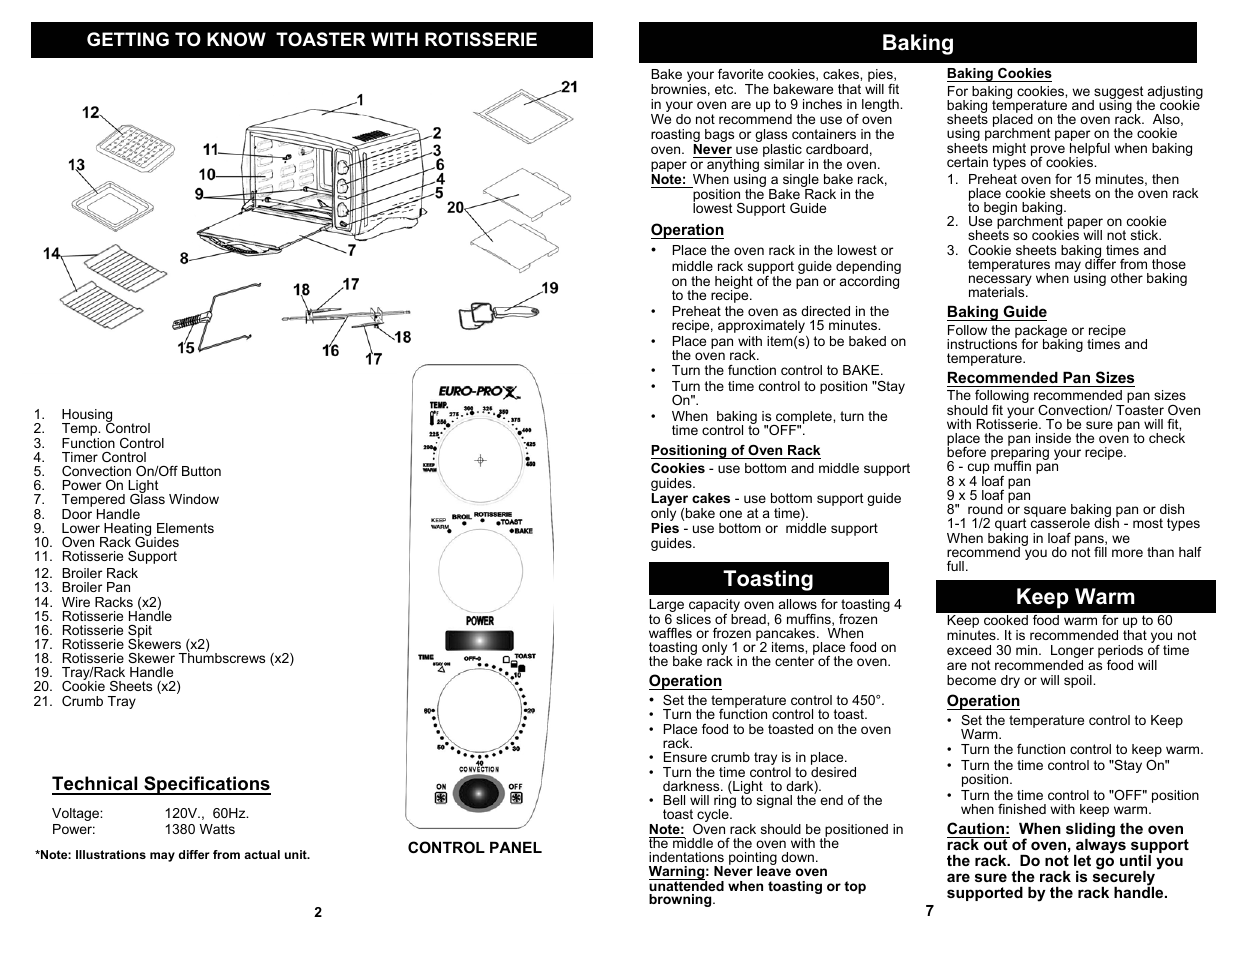 Euro Pro Convection Oven Manual